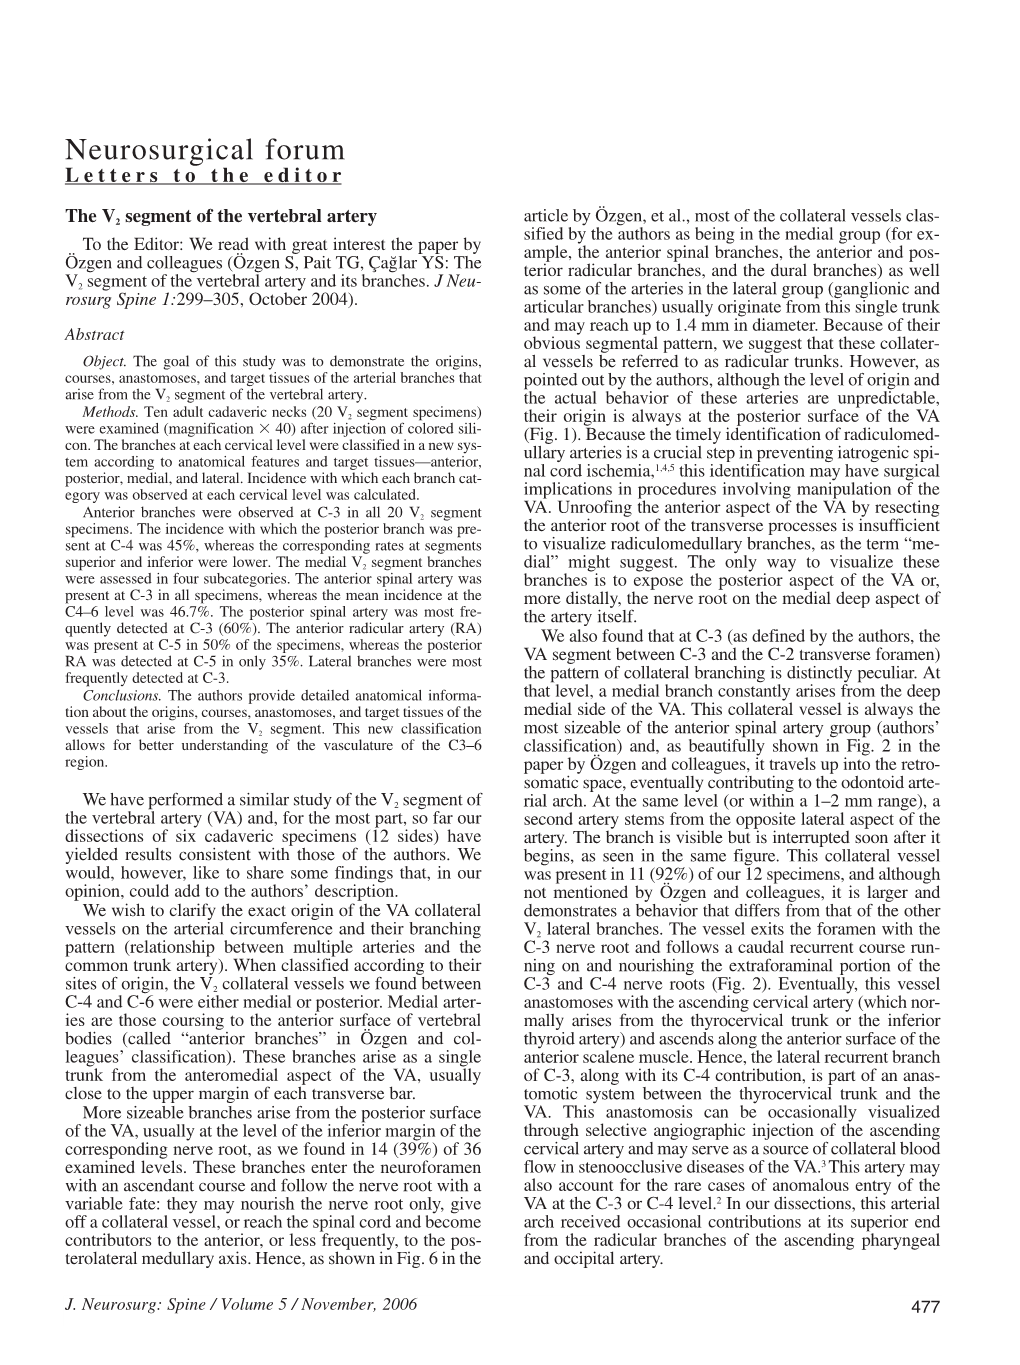 Neurosurgical Forum Letters to the Editor